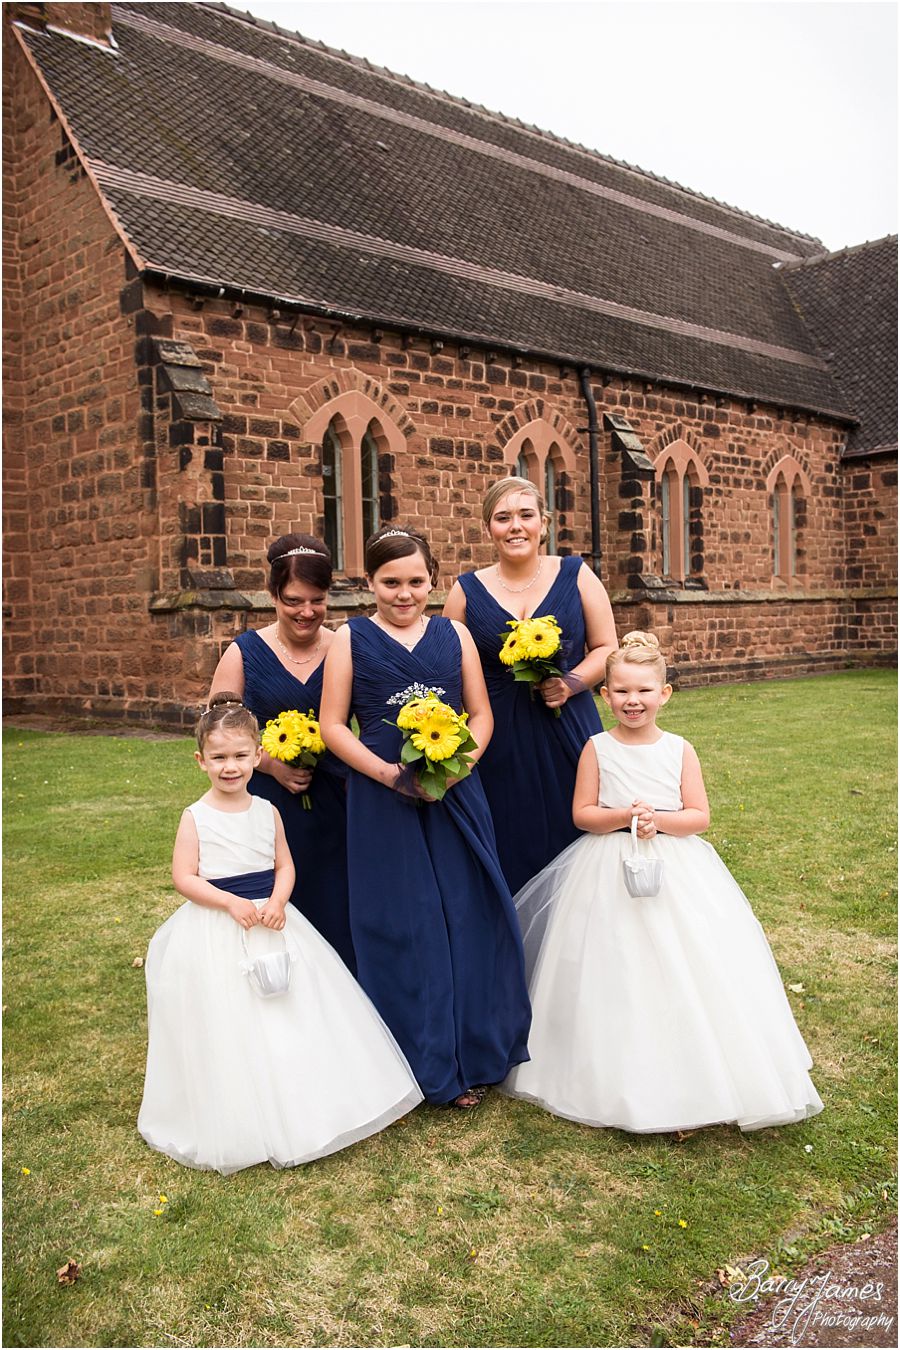 Beautiful creative wedding photography at St James Church in Brownhills by Experienced Contemporary Candid and Creative Wedding Photographer Barry James